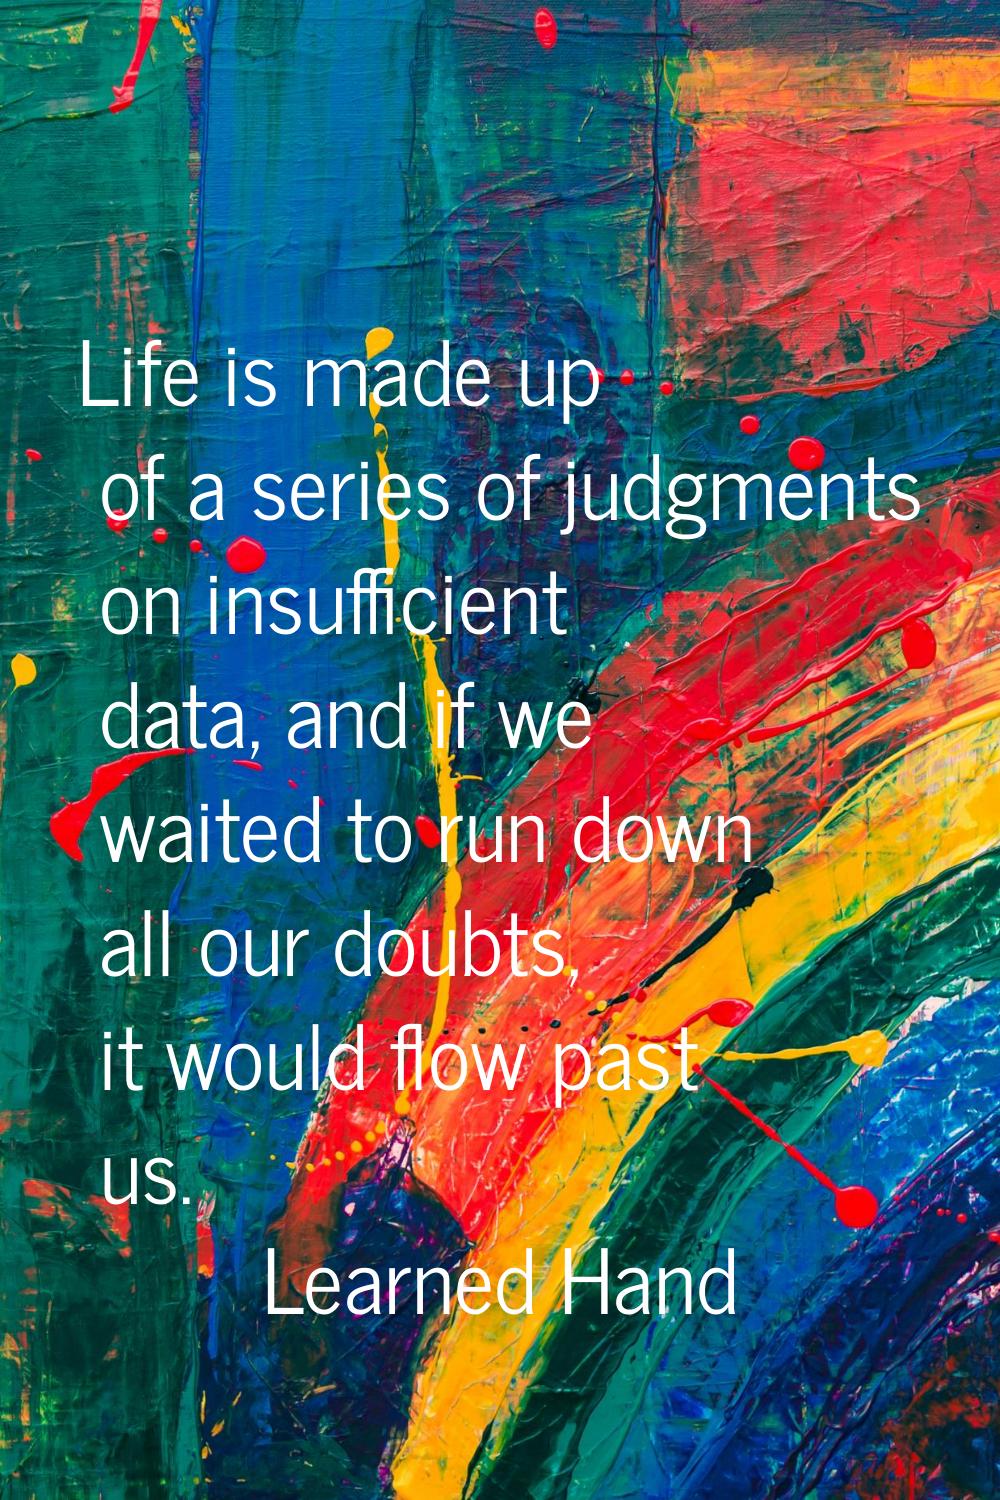 Life is made up of a series of judgments on insufficient data, and if we waited to run down all our